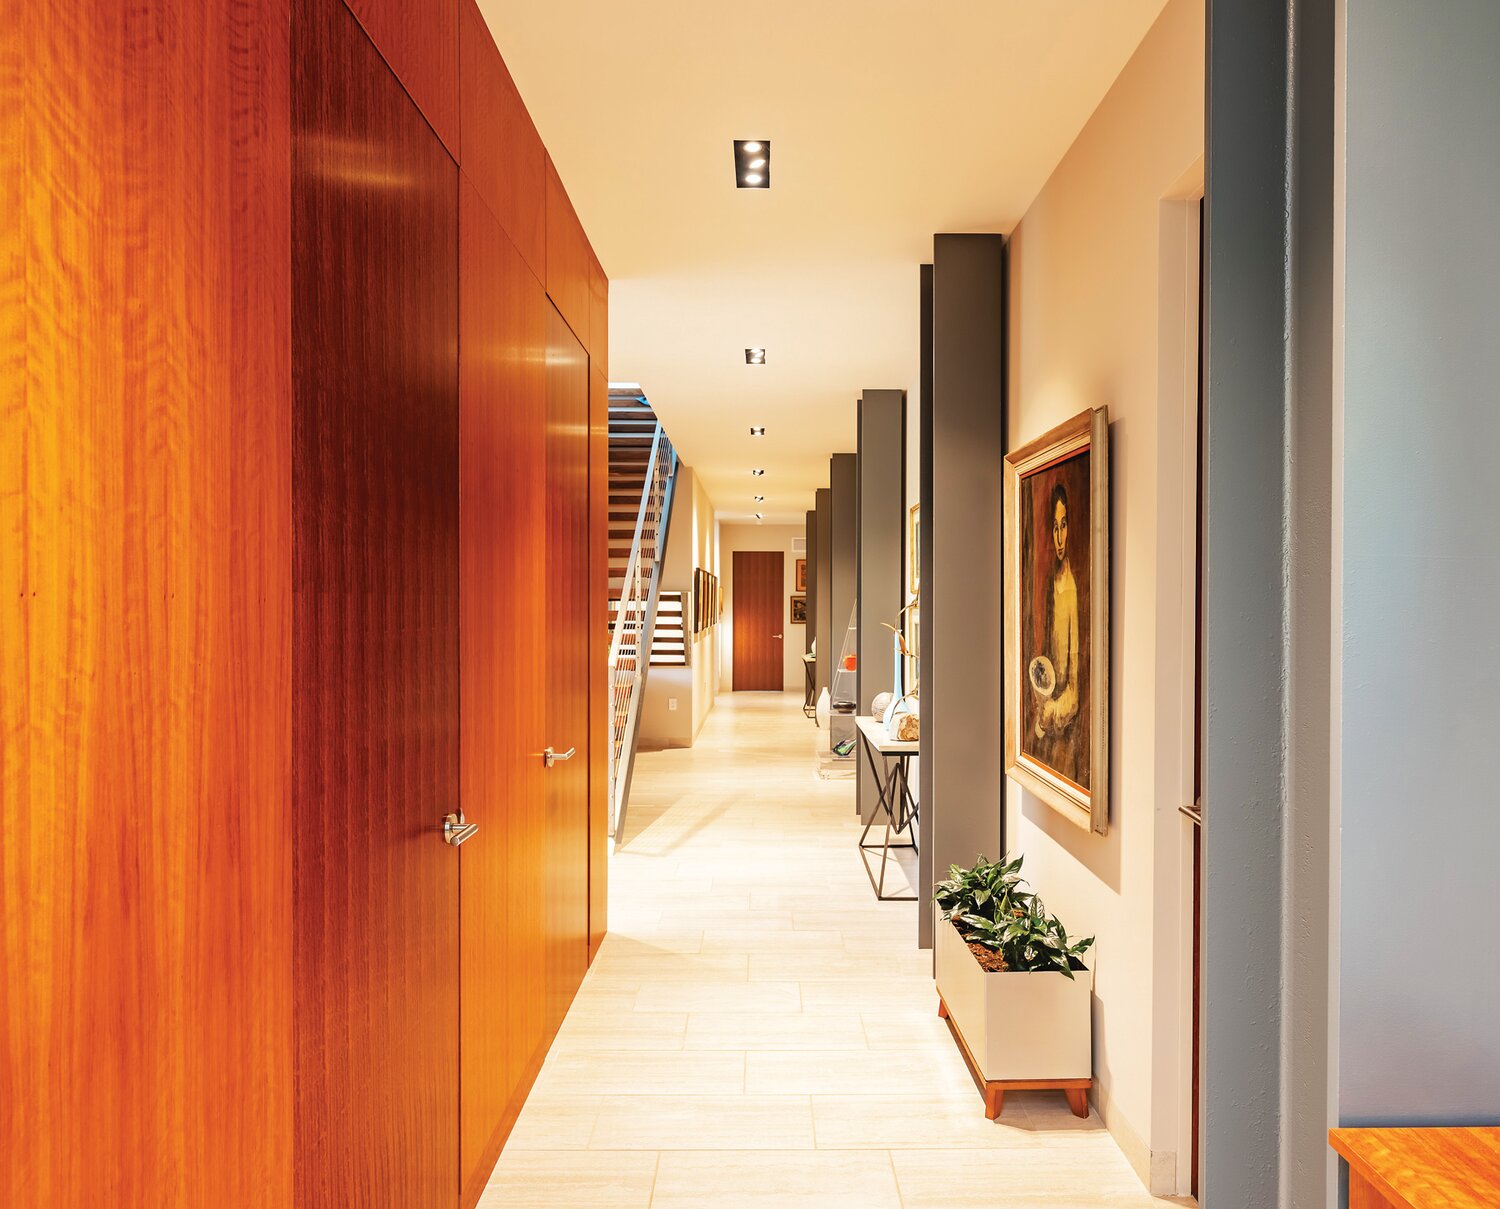 A long hallway at the River Road Residence, which was designed by Princeton’s J. Robert Hillier, of Studio Hillier.